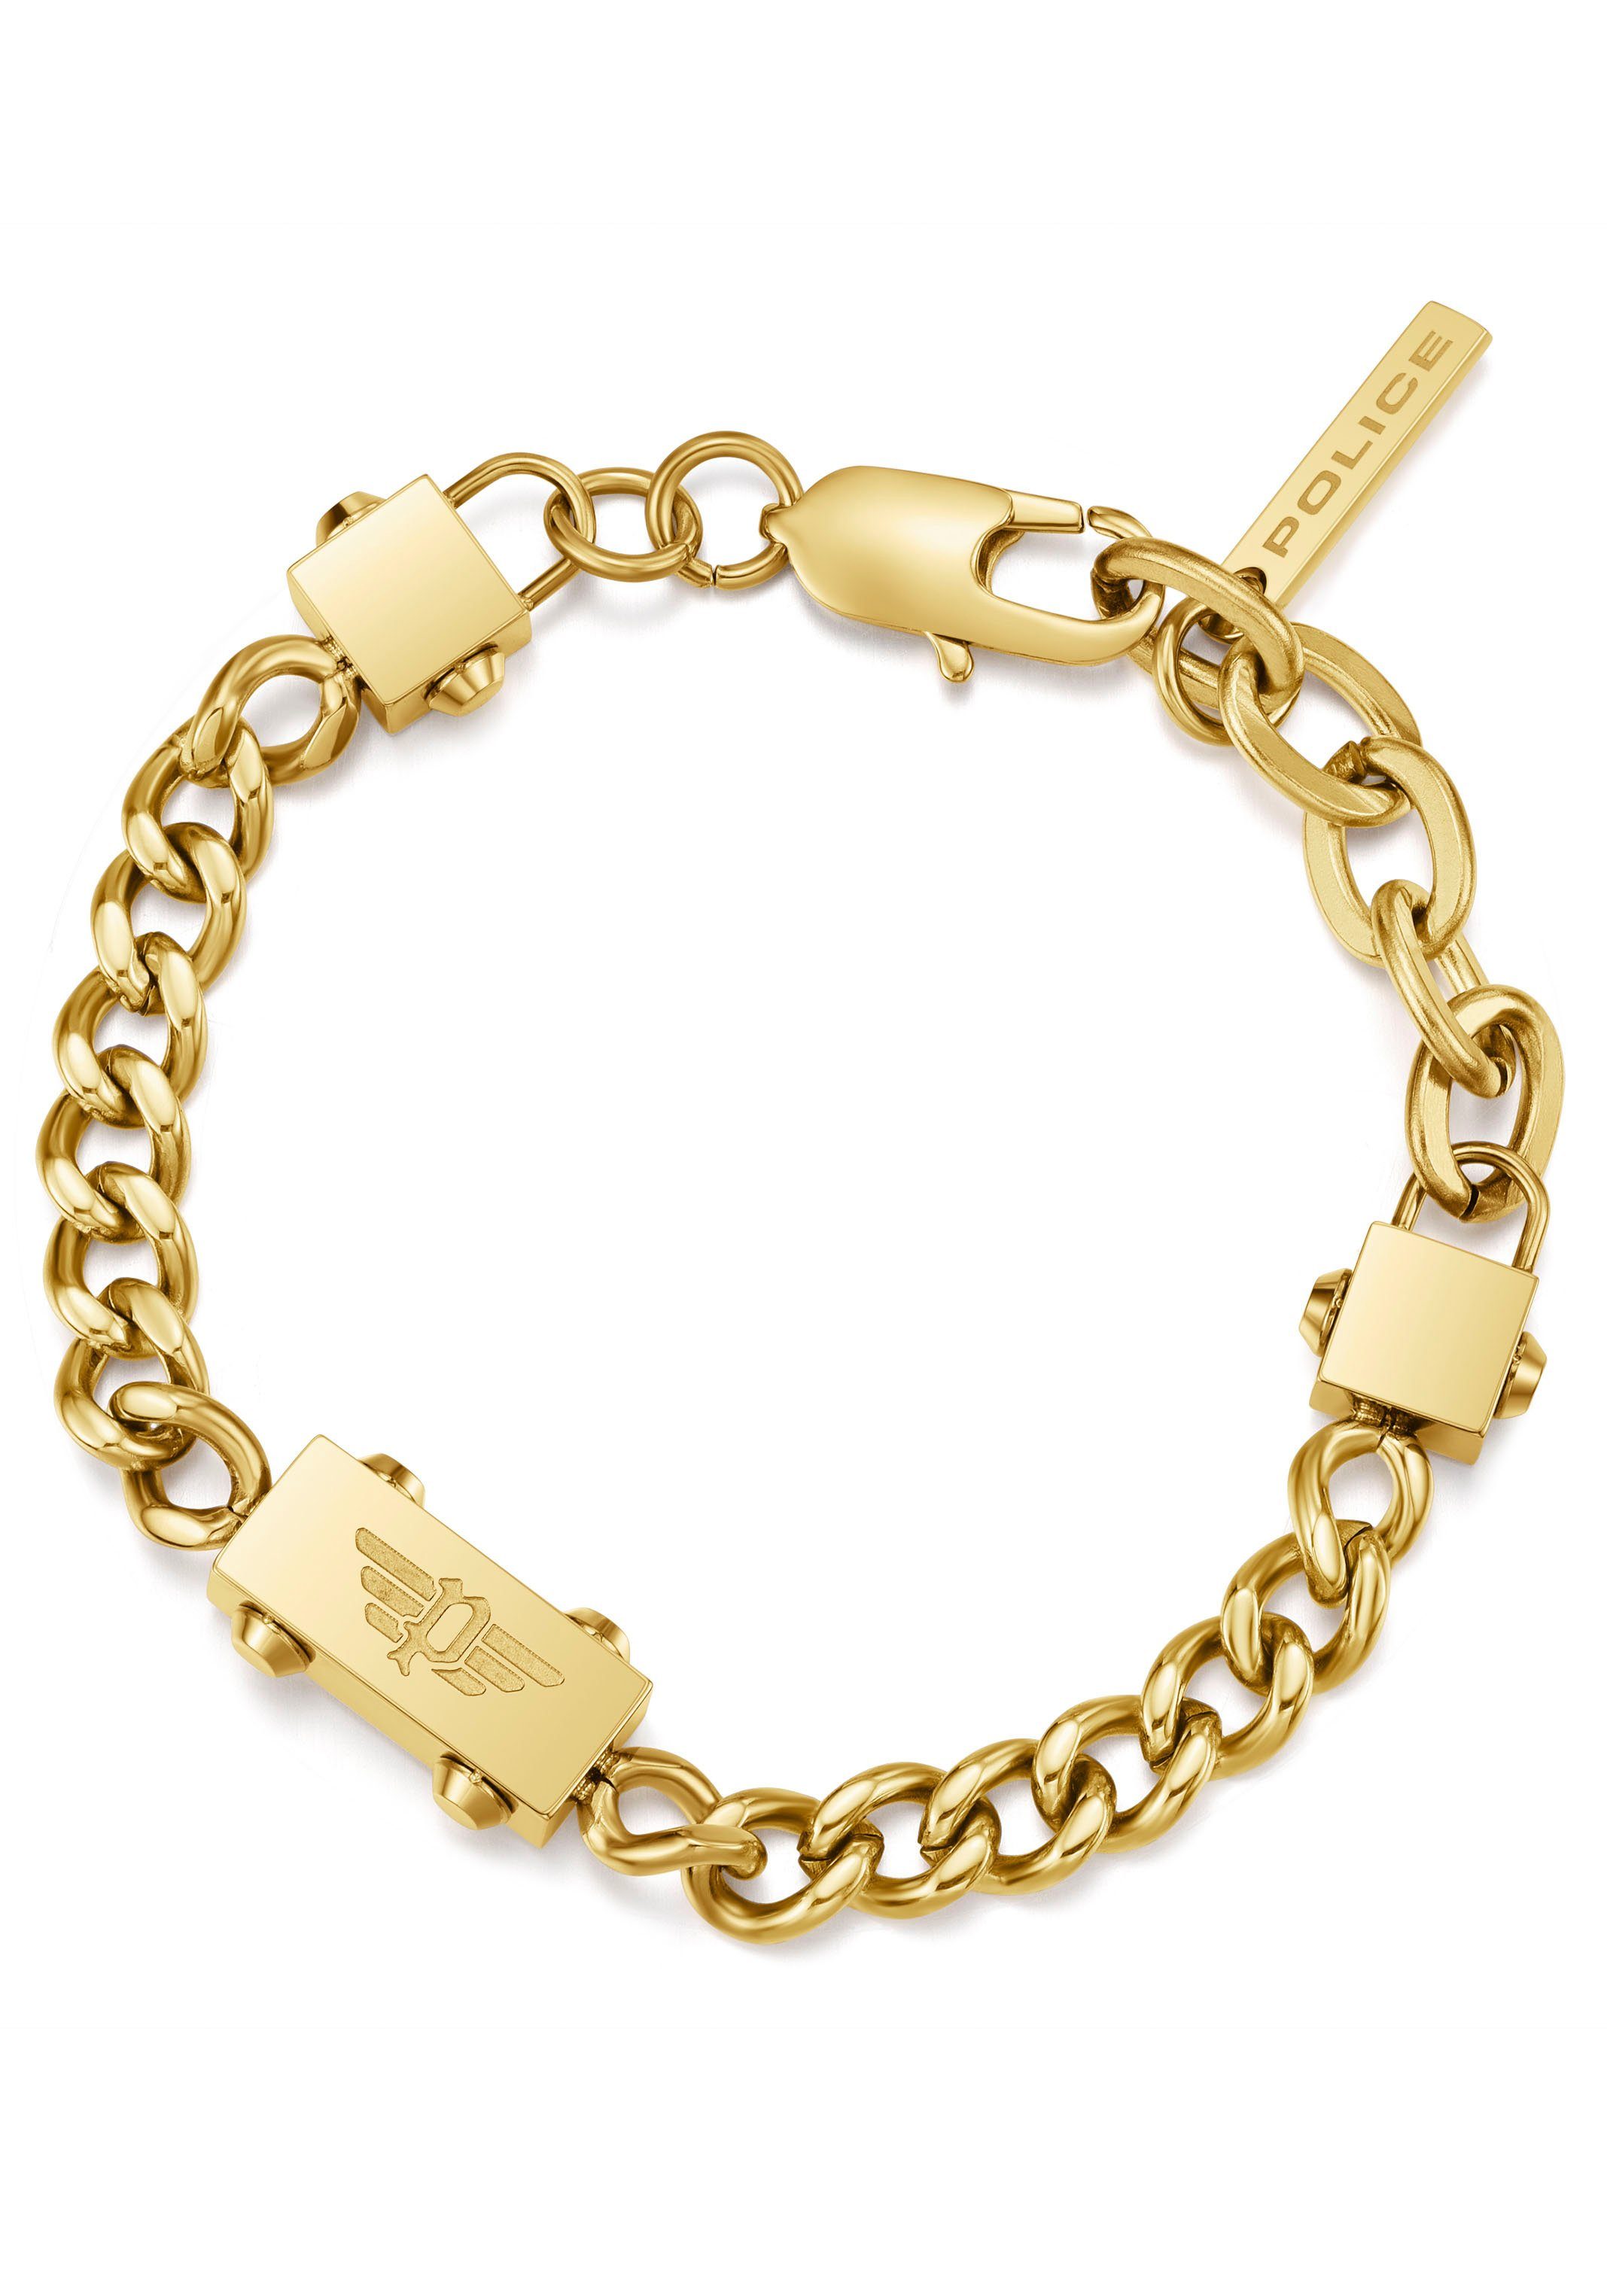 PEAGB0002102, CHAINED, gelbgoldfarben Armband PEAGB0002106 Police